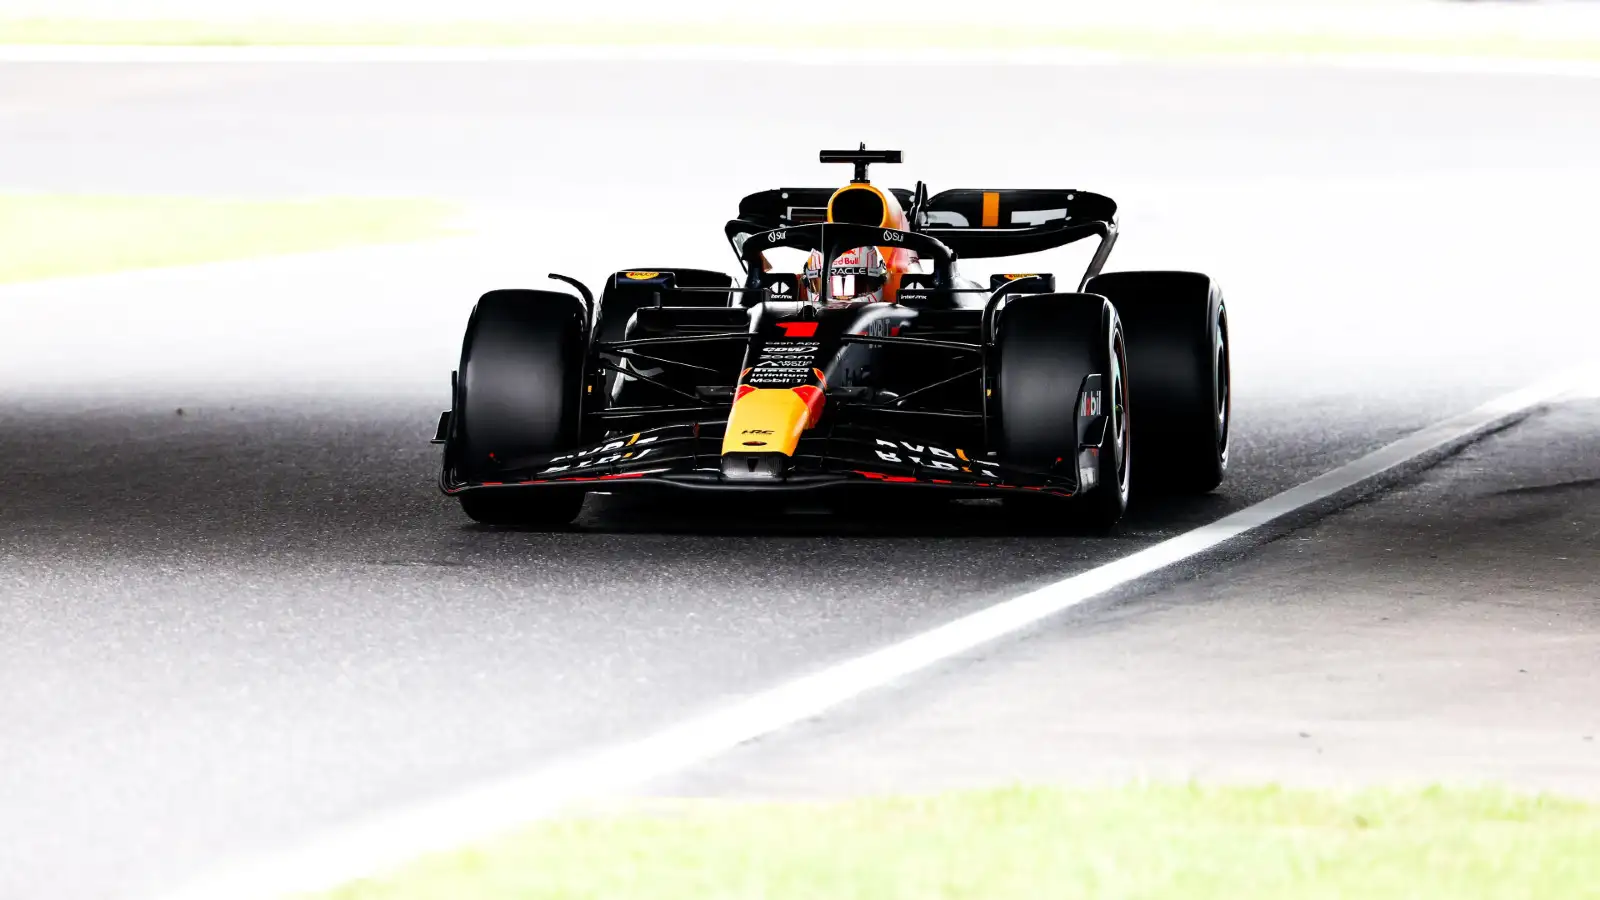 Red Bull's Max Verstappen on track at the Japanese Grand Prix.